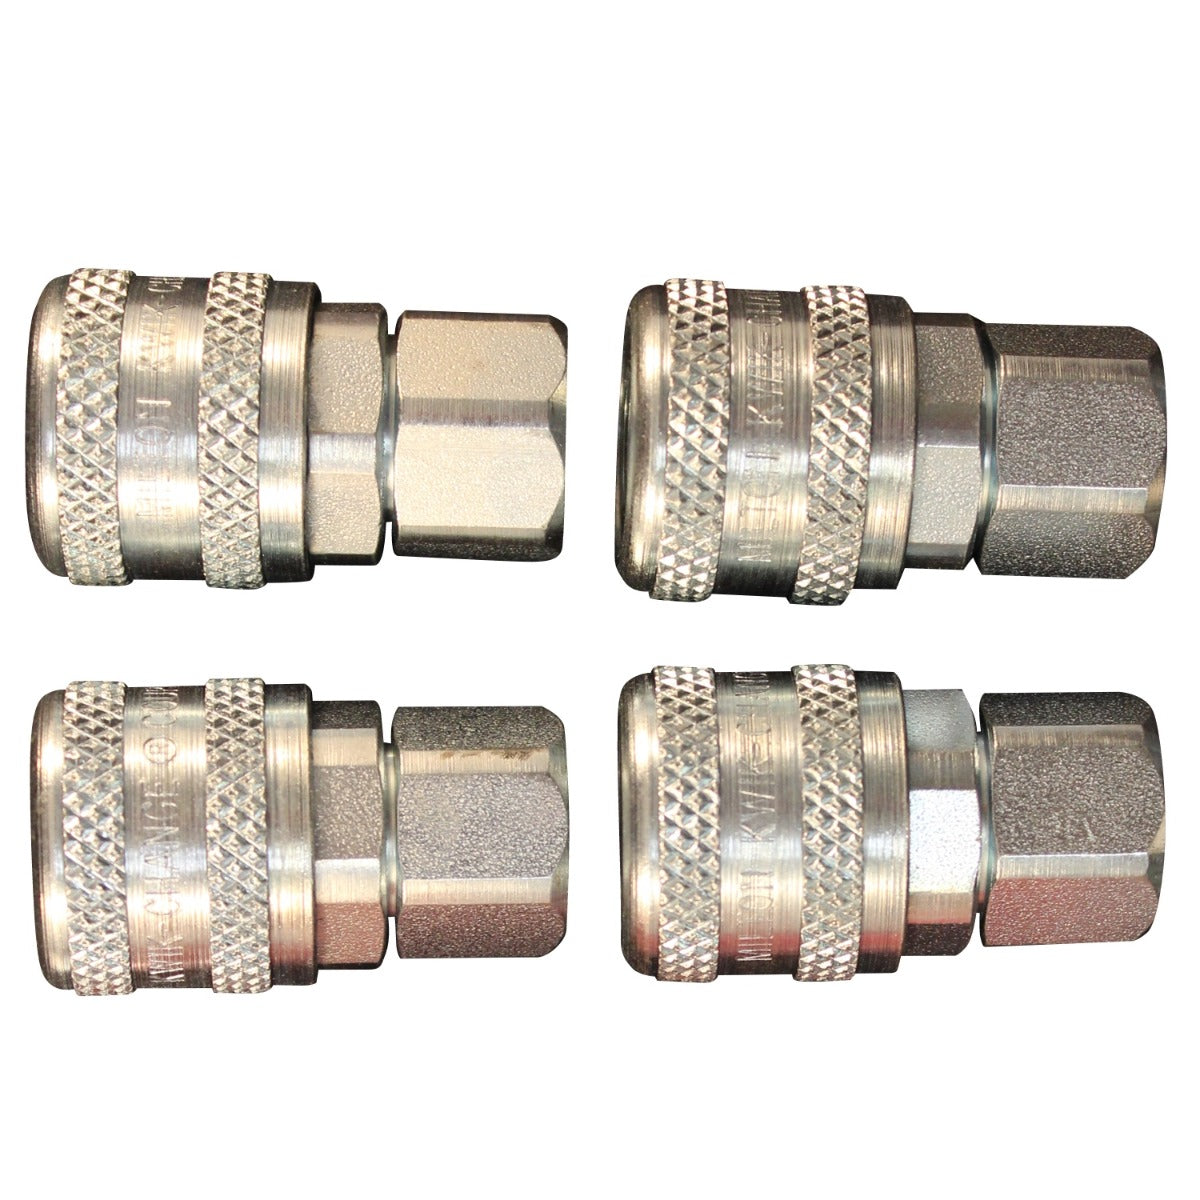 A-Style Coupler, Quick Connect Fittings, 1/4